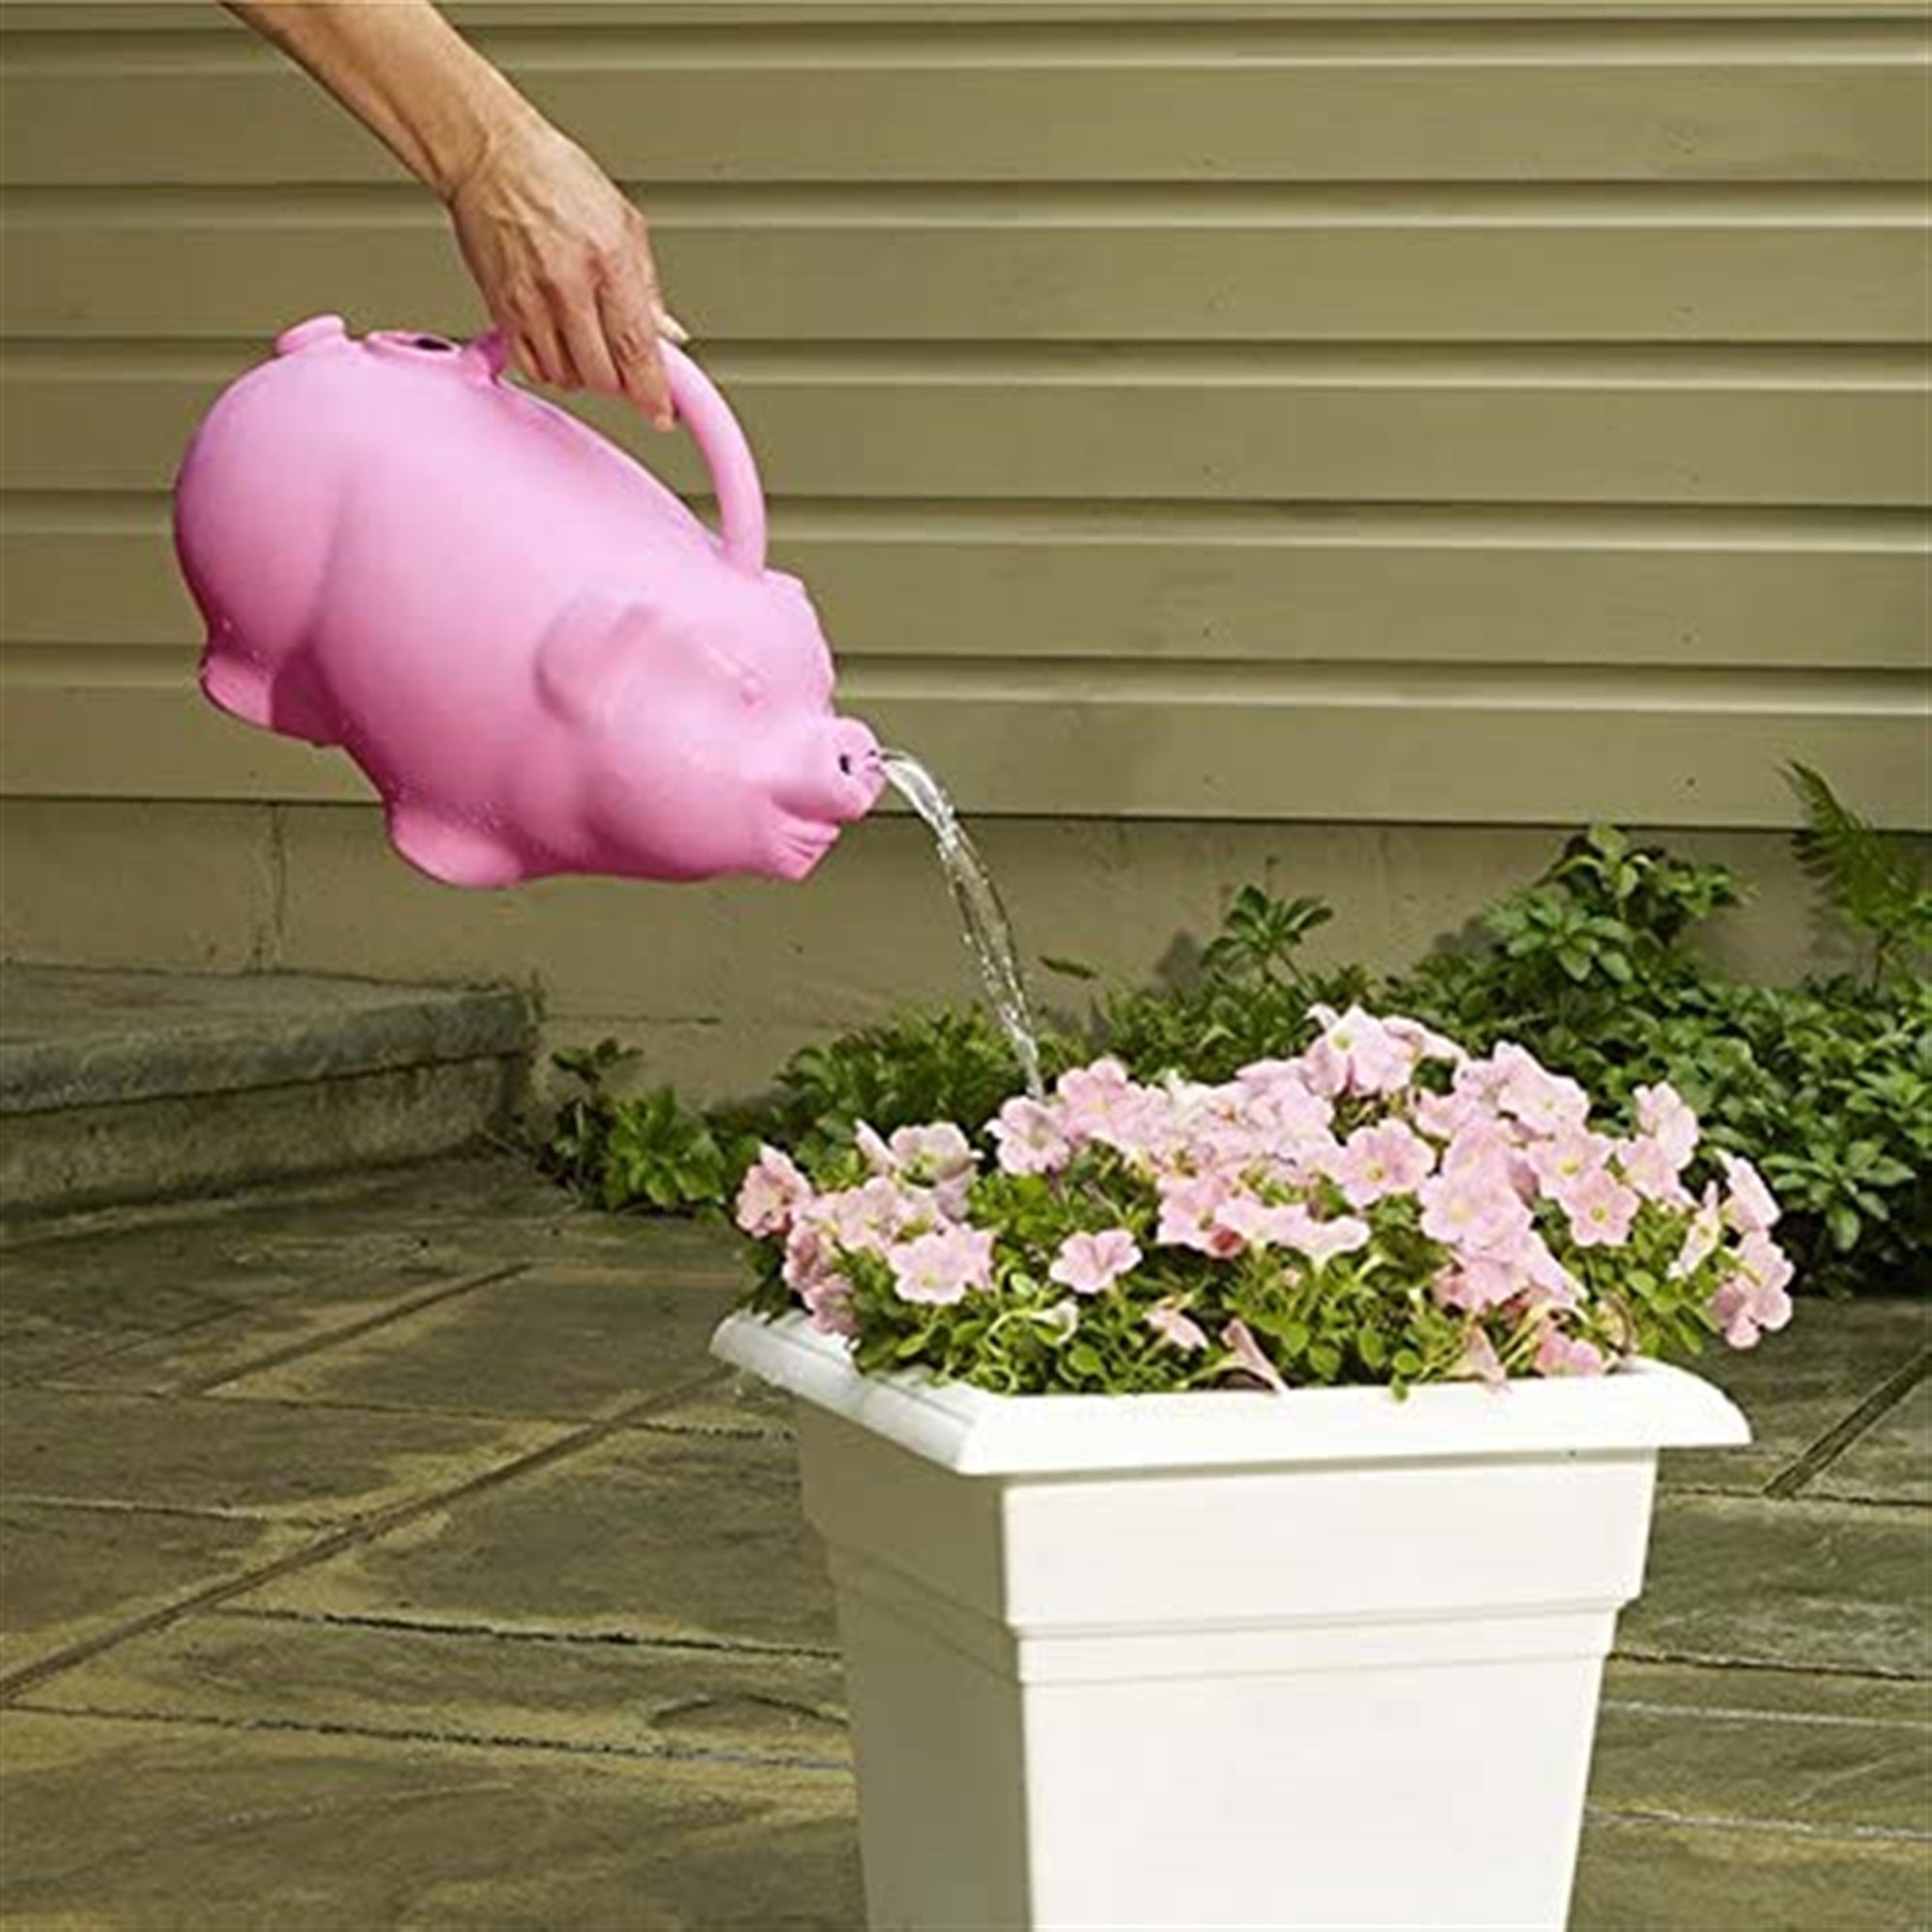 BABS Children's Pig Watering Can, Pink, 1.75 Gallons